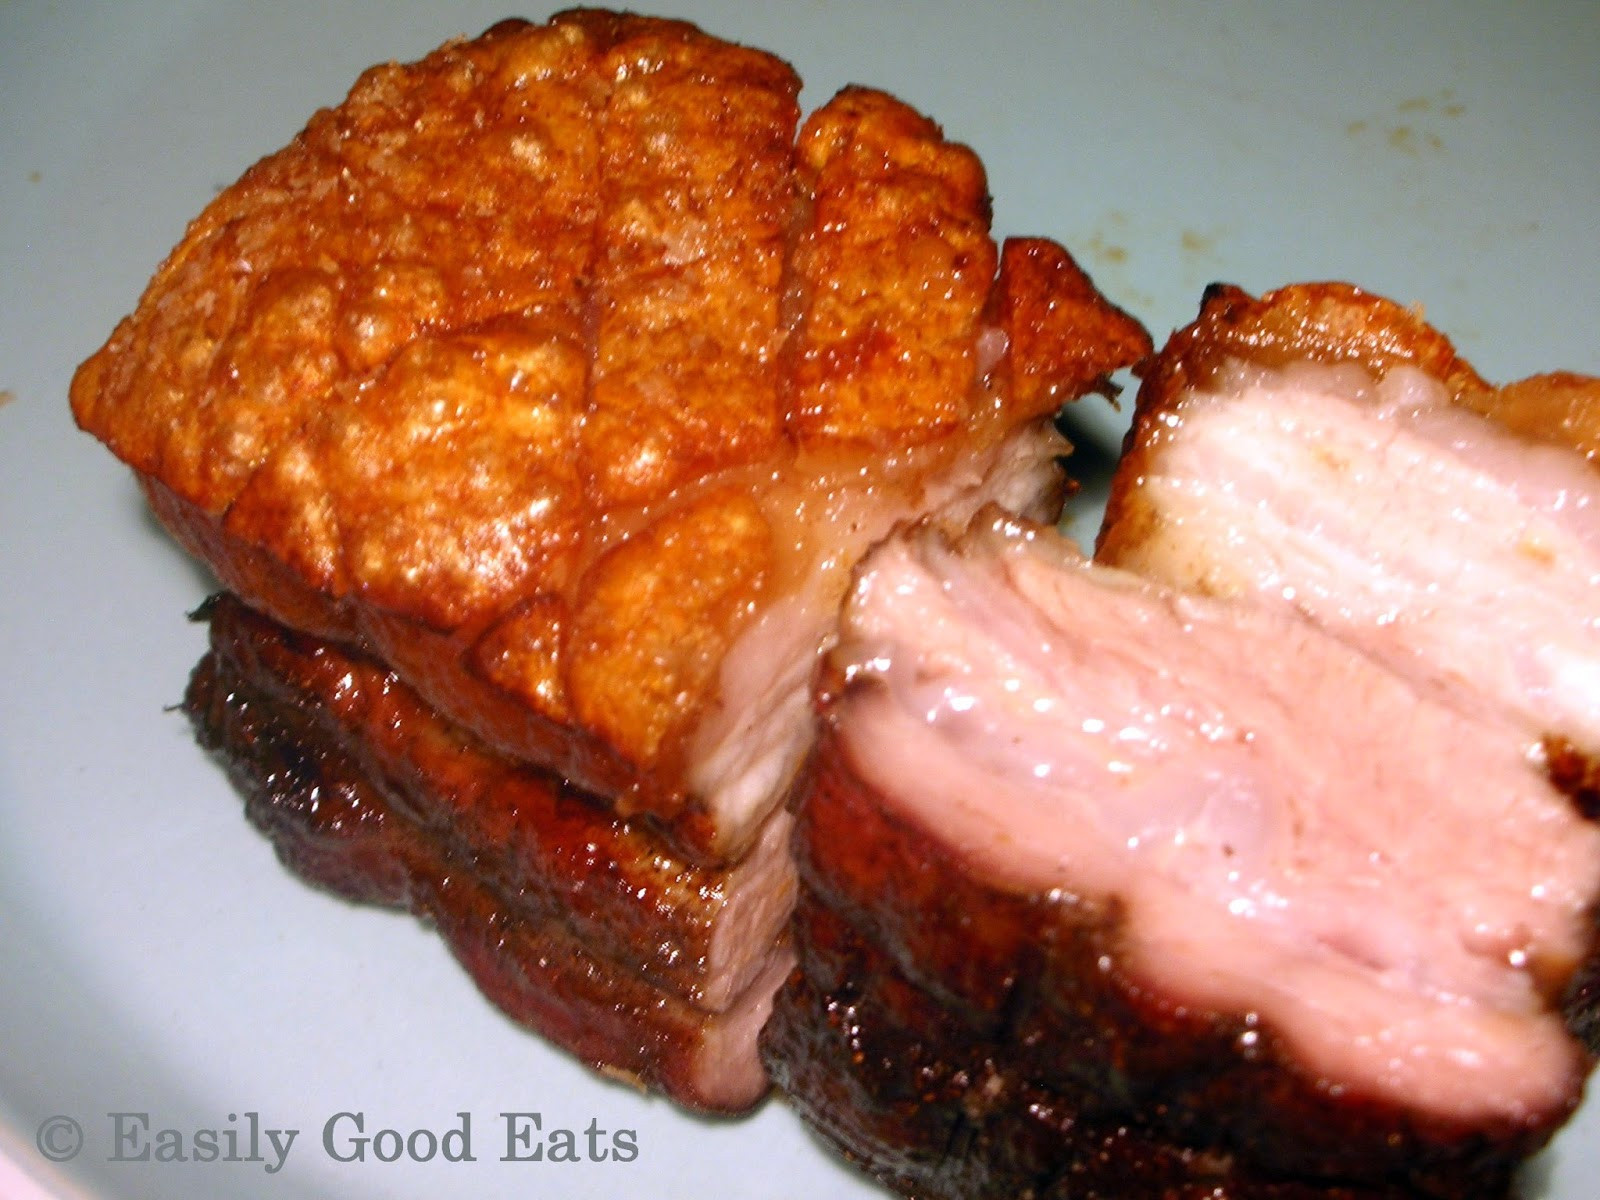 Chinese Roasted Pork Belly Recipes
 Easily Good Eats Crispy Chinese Roasted Pork Belly Recipe